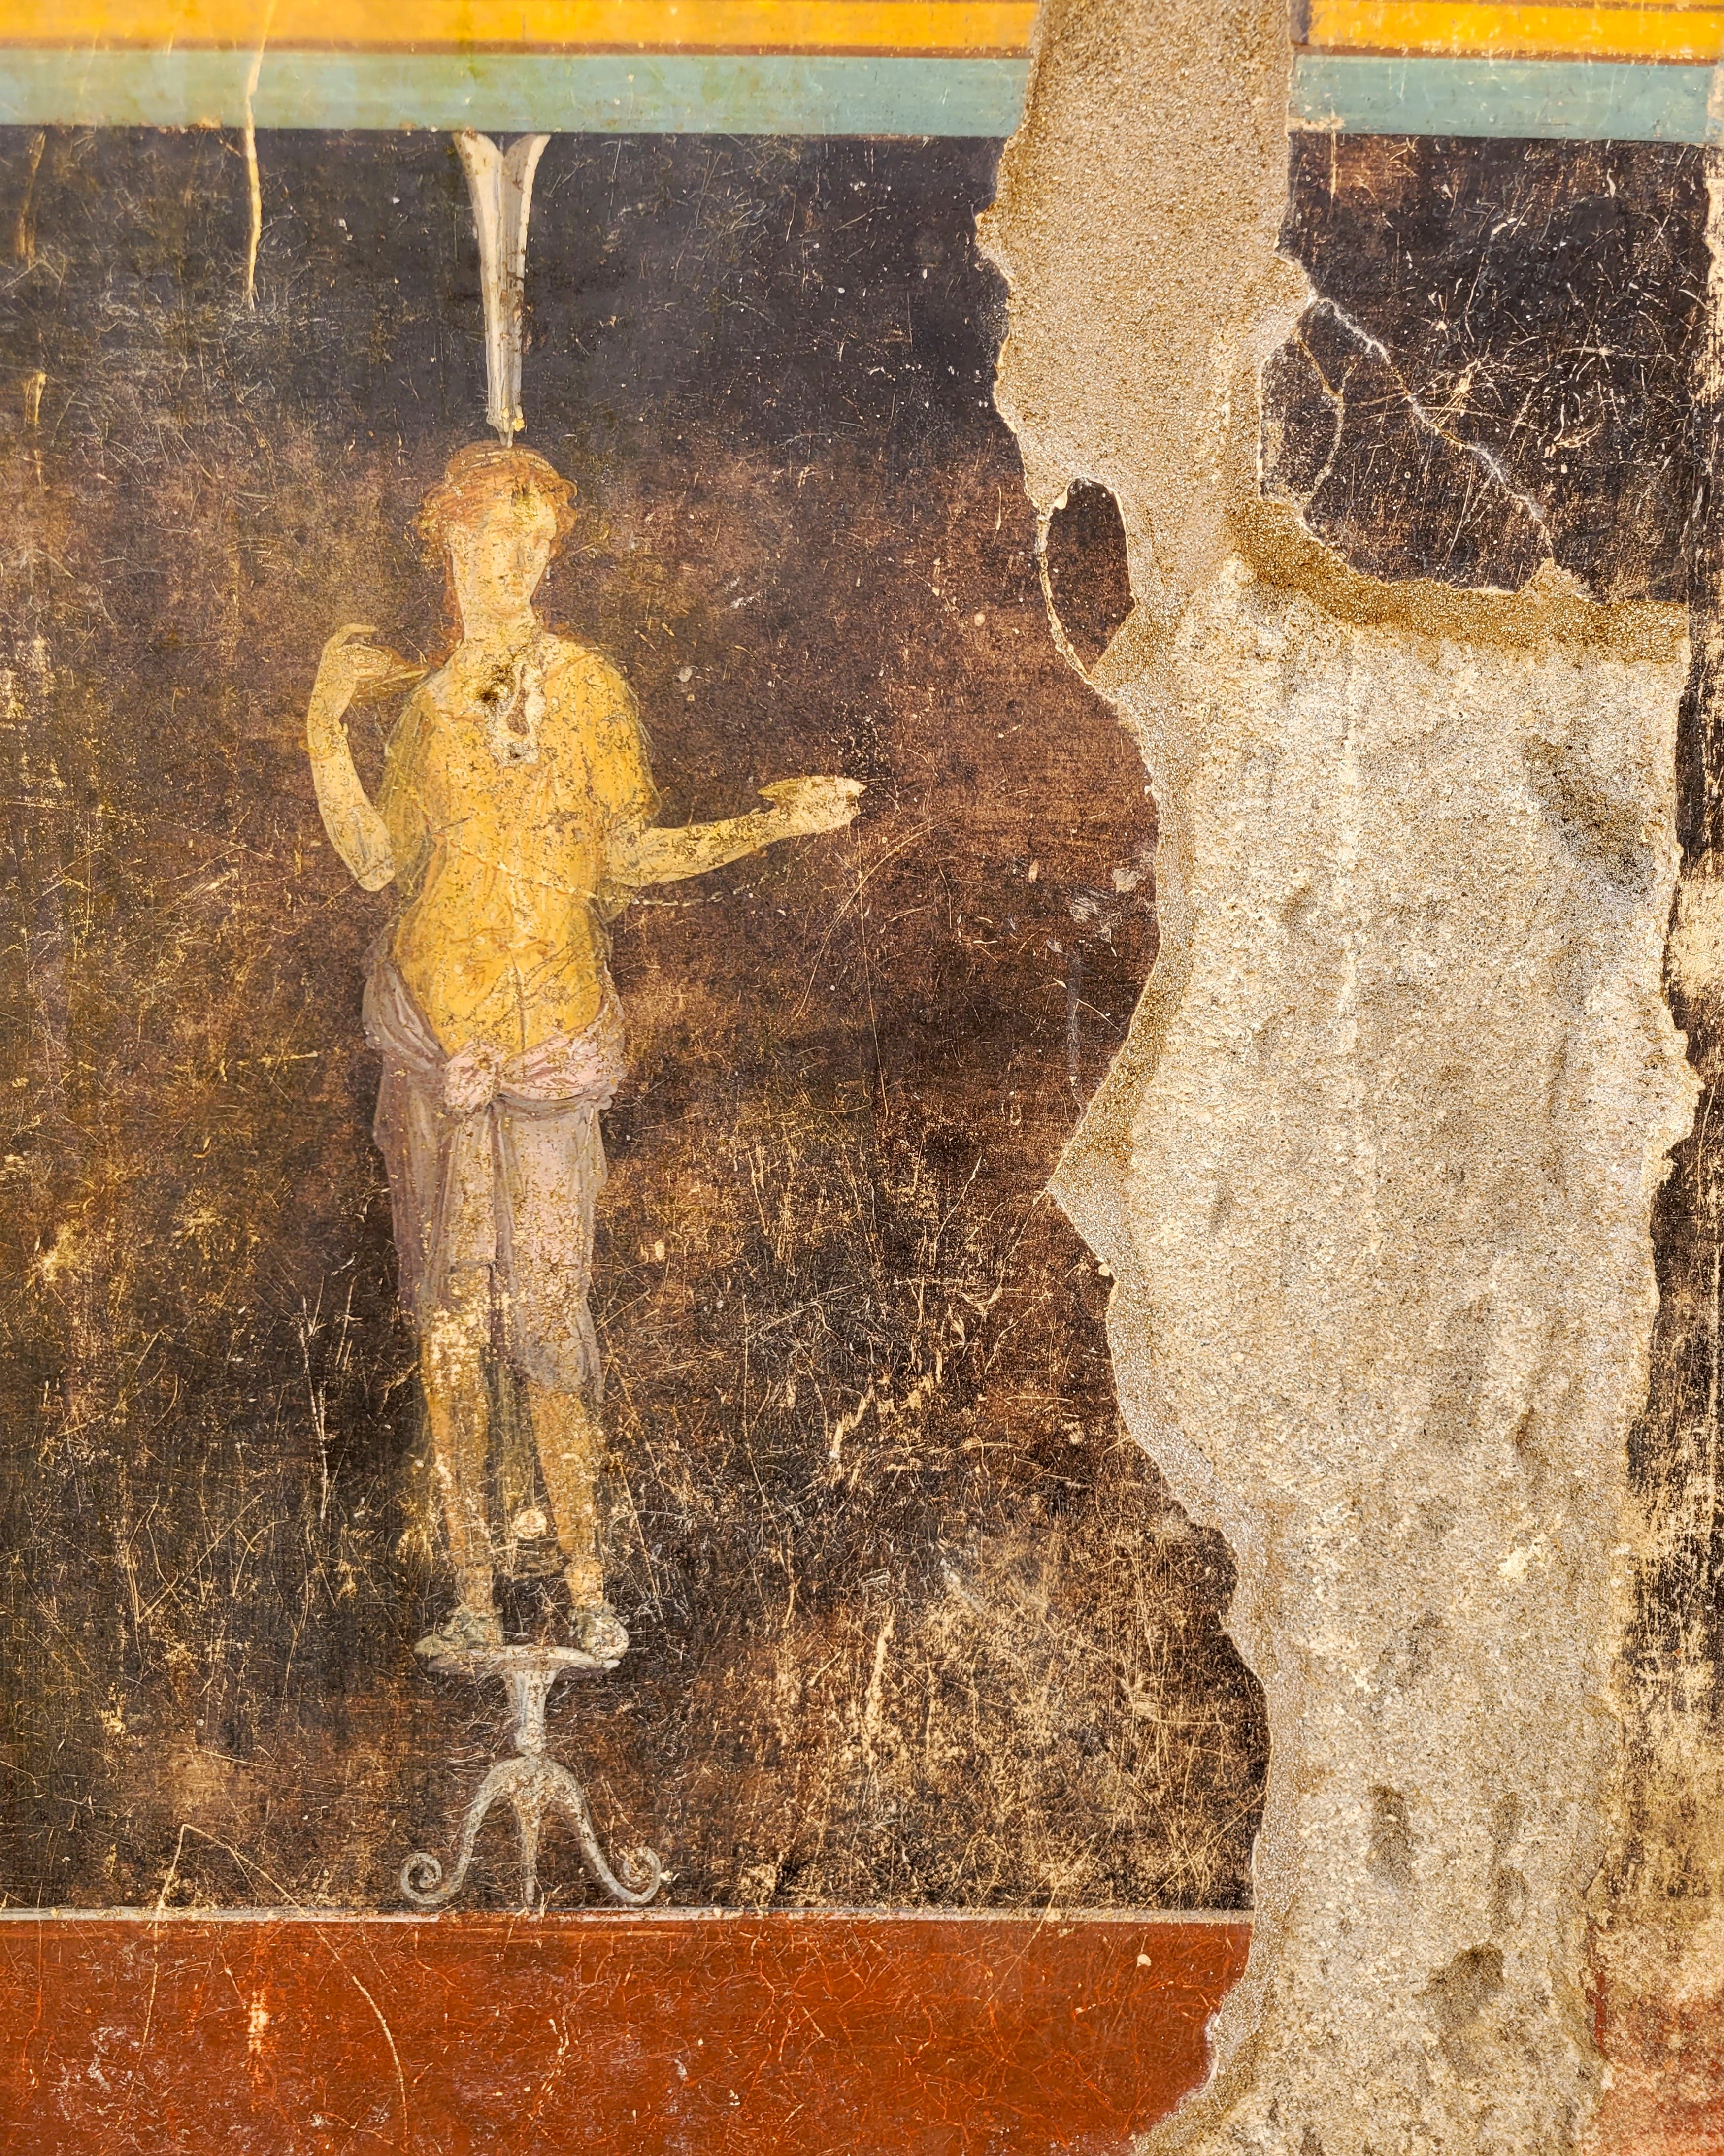 Another 2,000-year-old fresco in the grand dining room